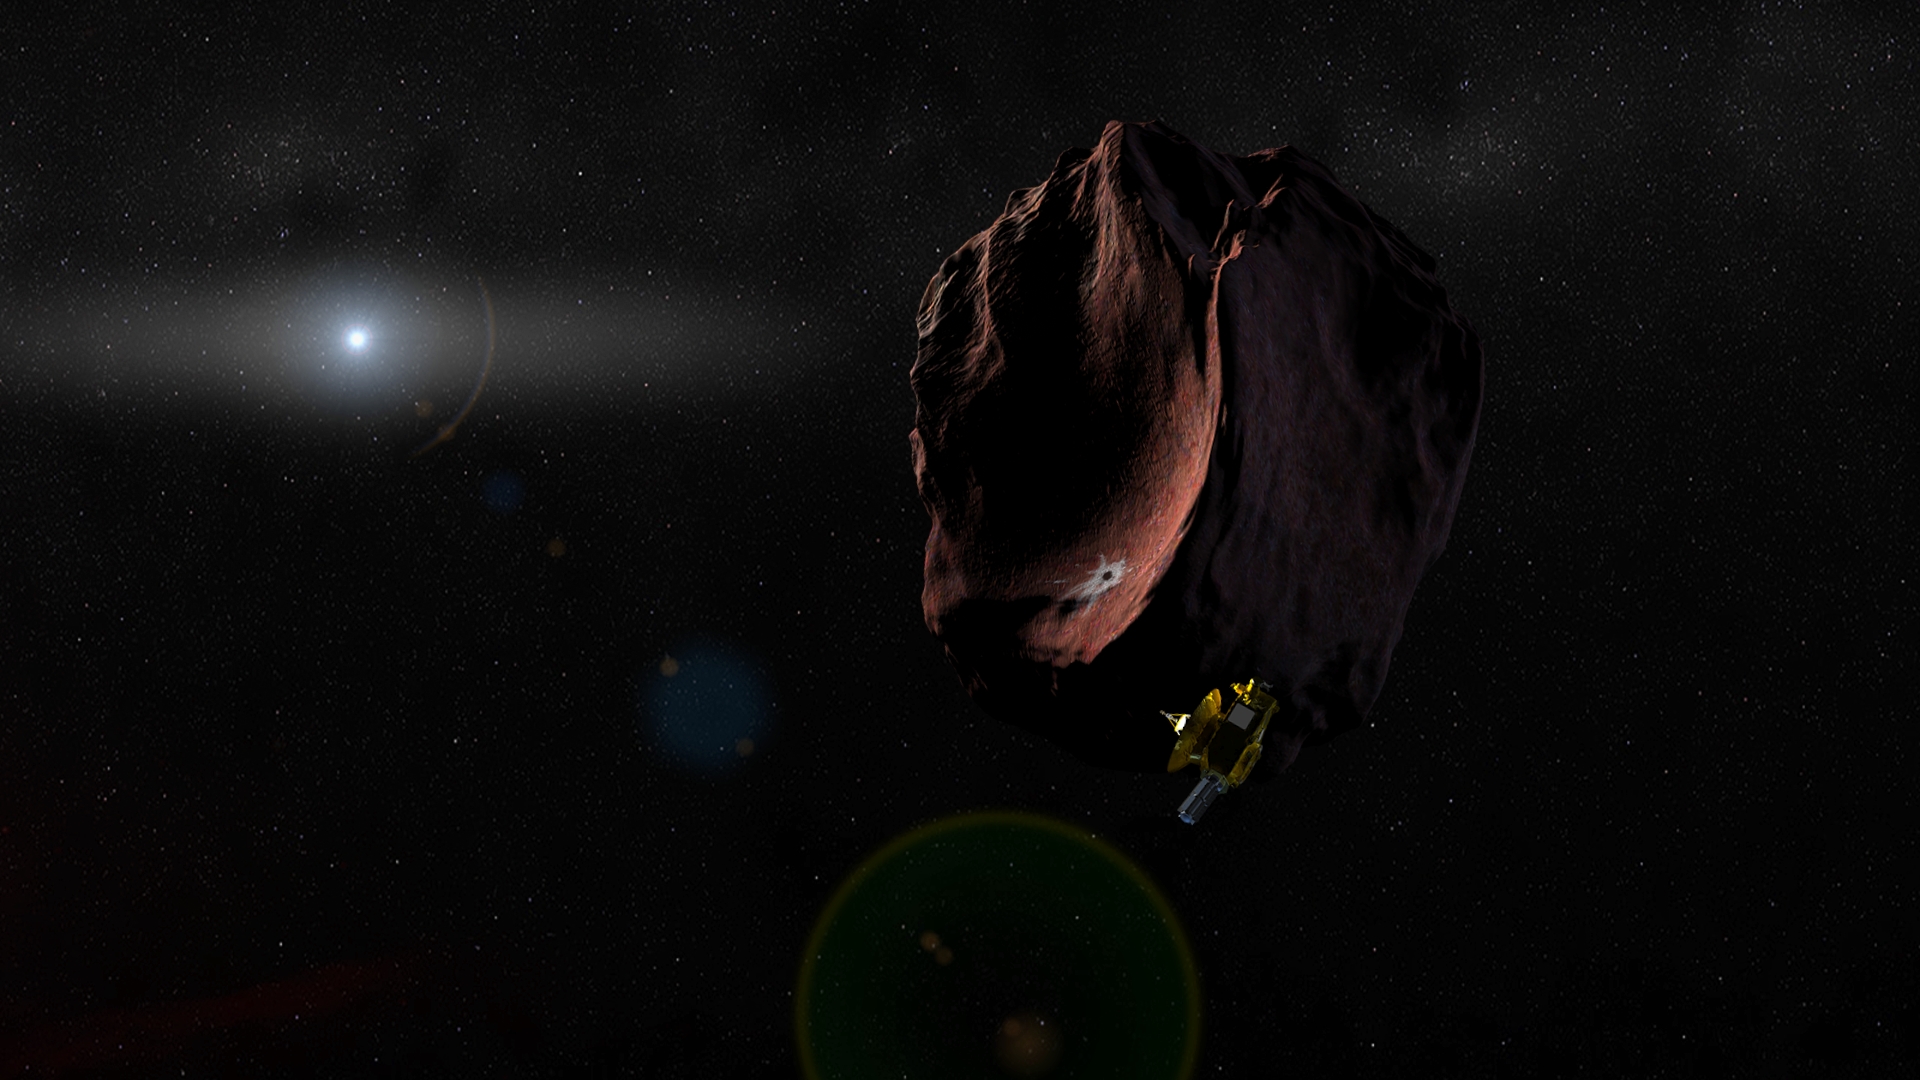 Artist’s impression of NASA’s New Horizons spacecraft encountering an object in the distant Kuiper Belt